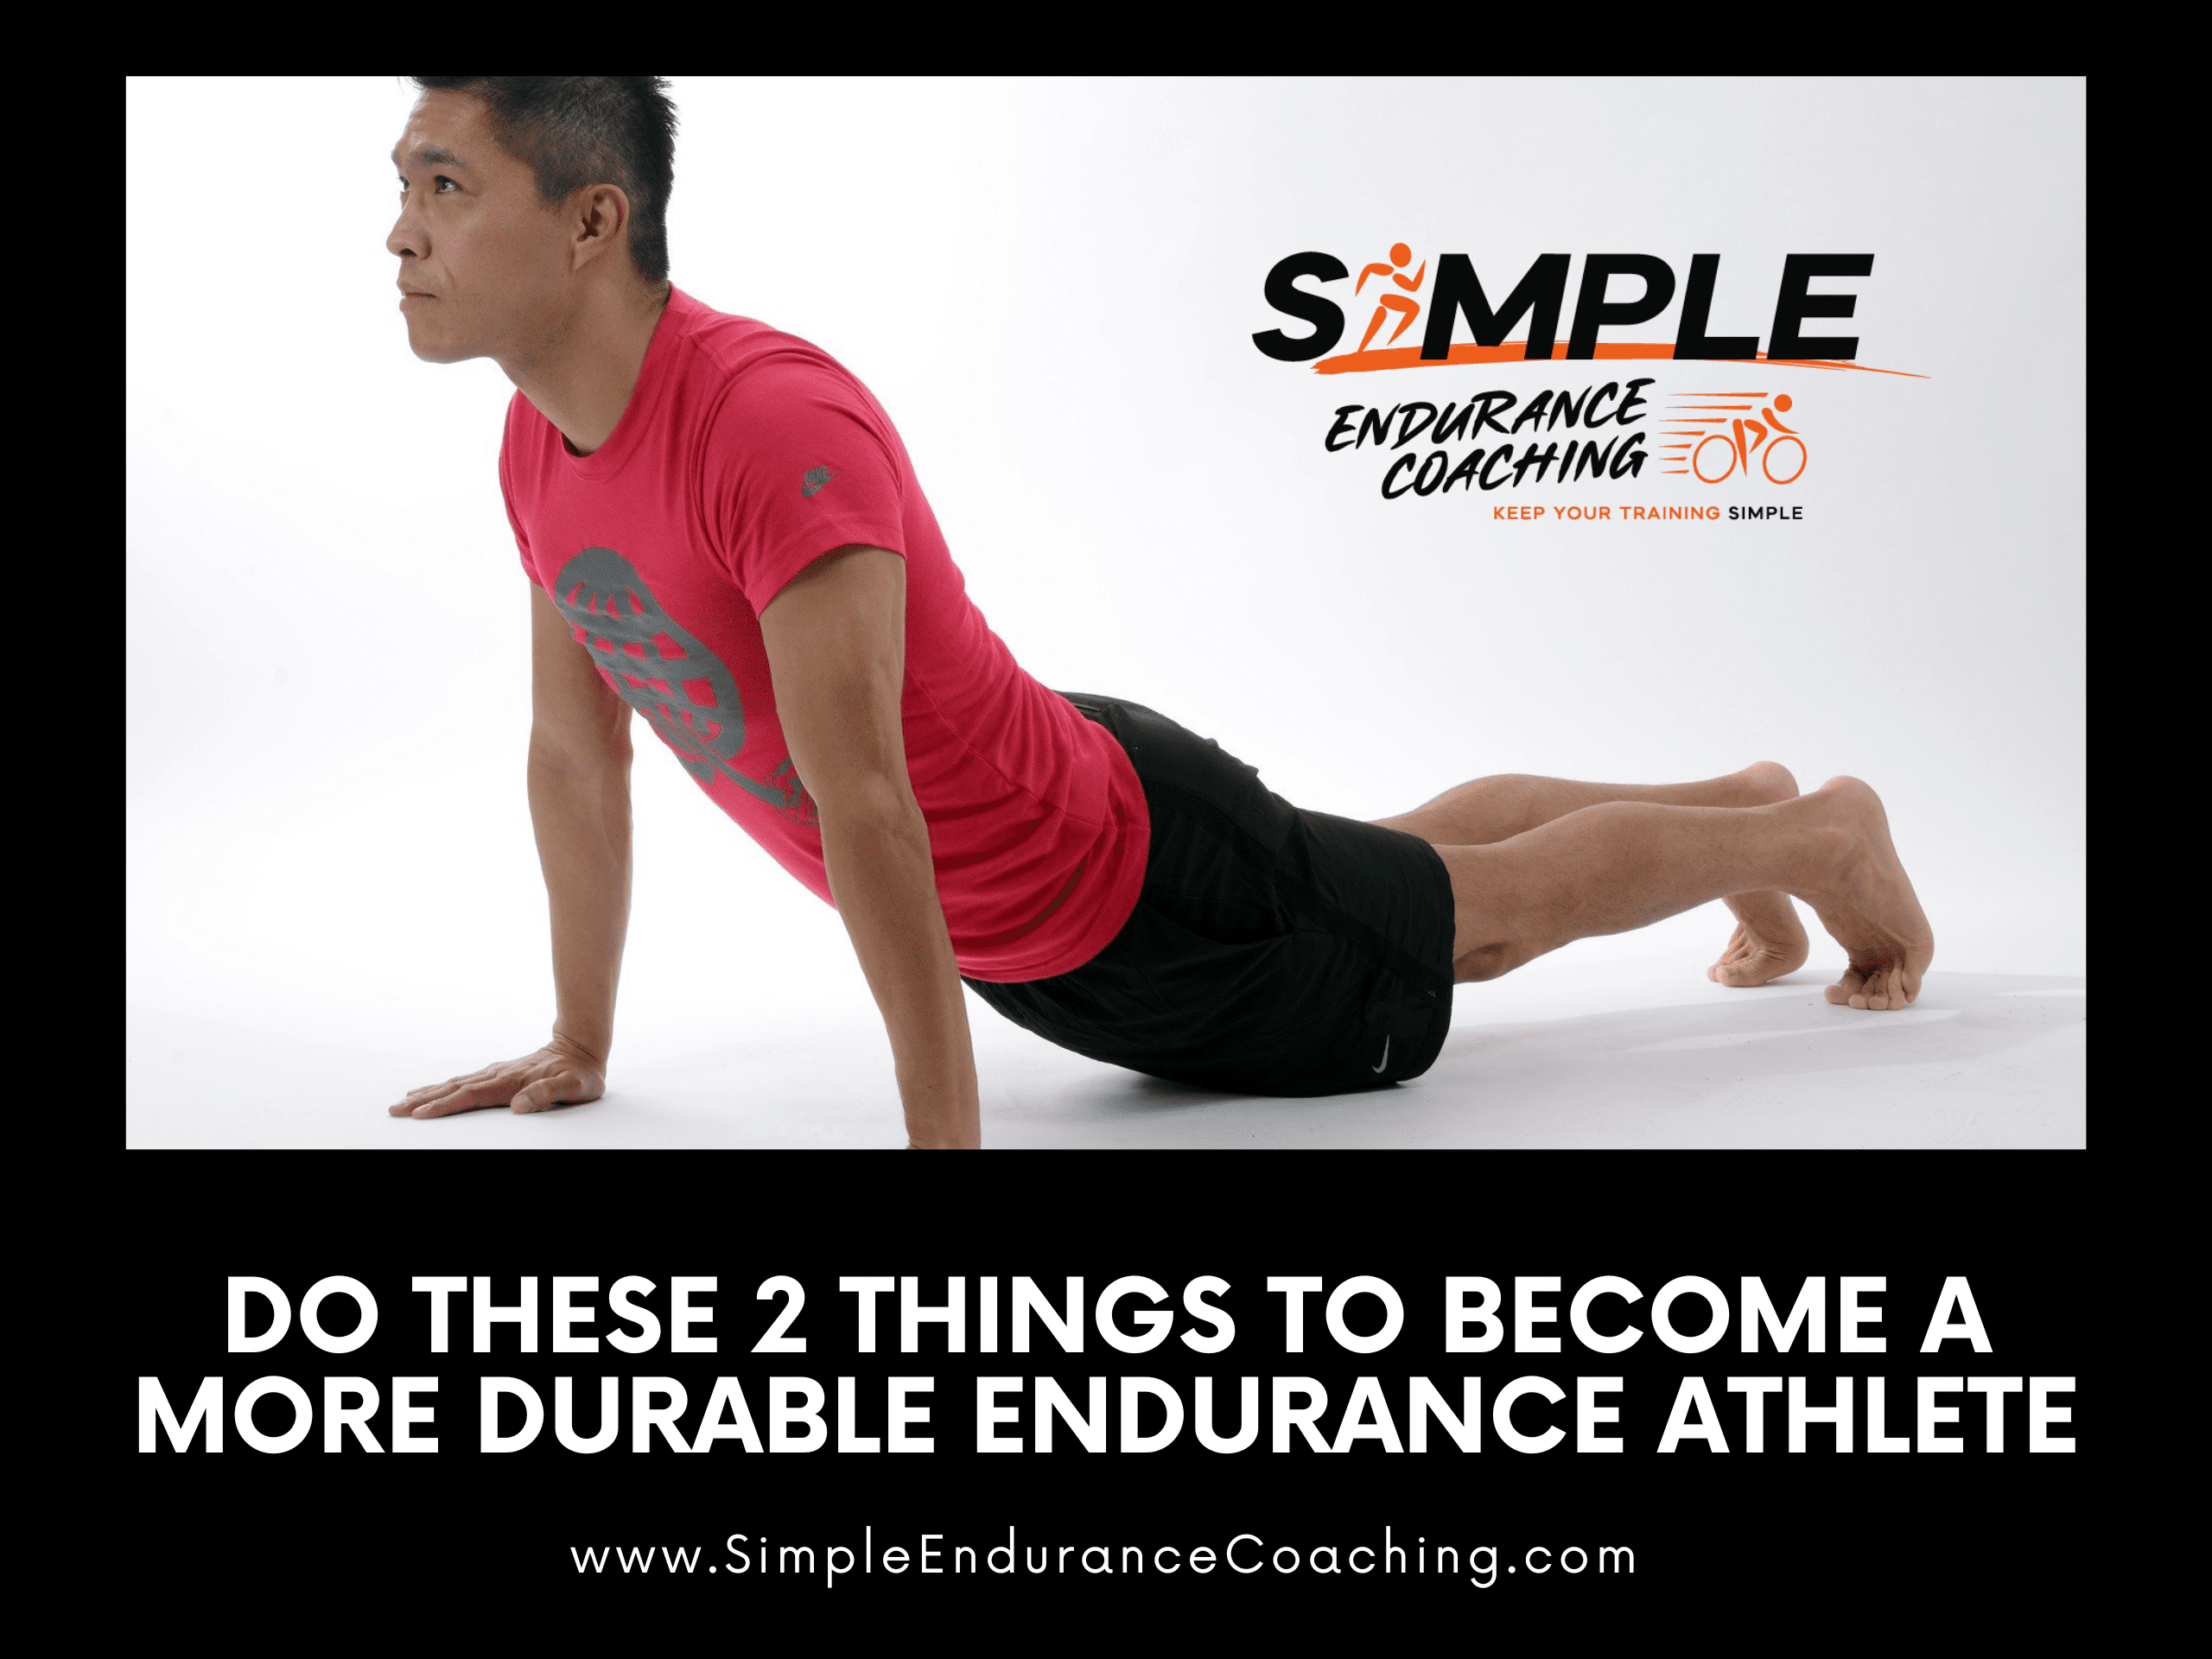 Do These 2 Things to Become a More Durable Endurance Athlete